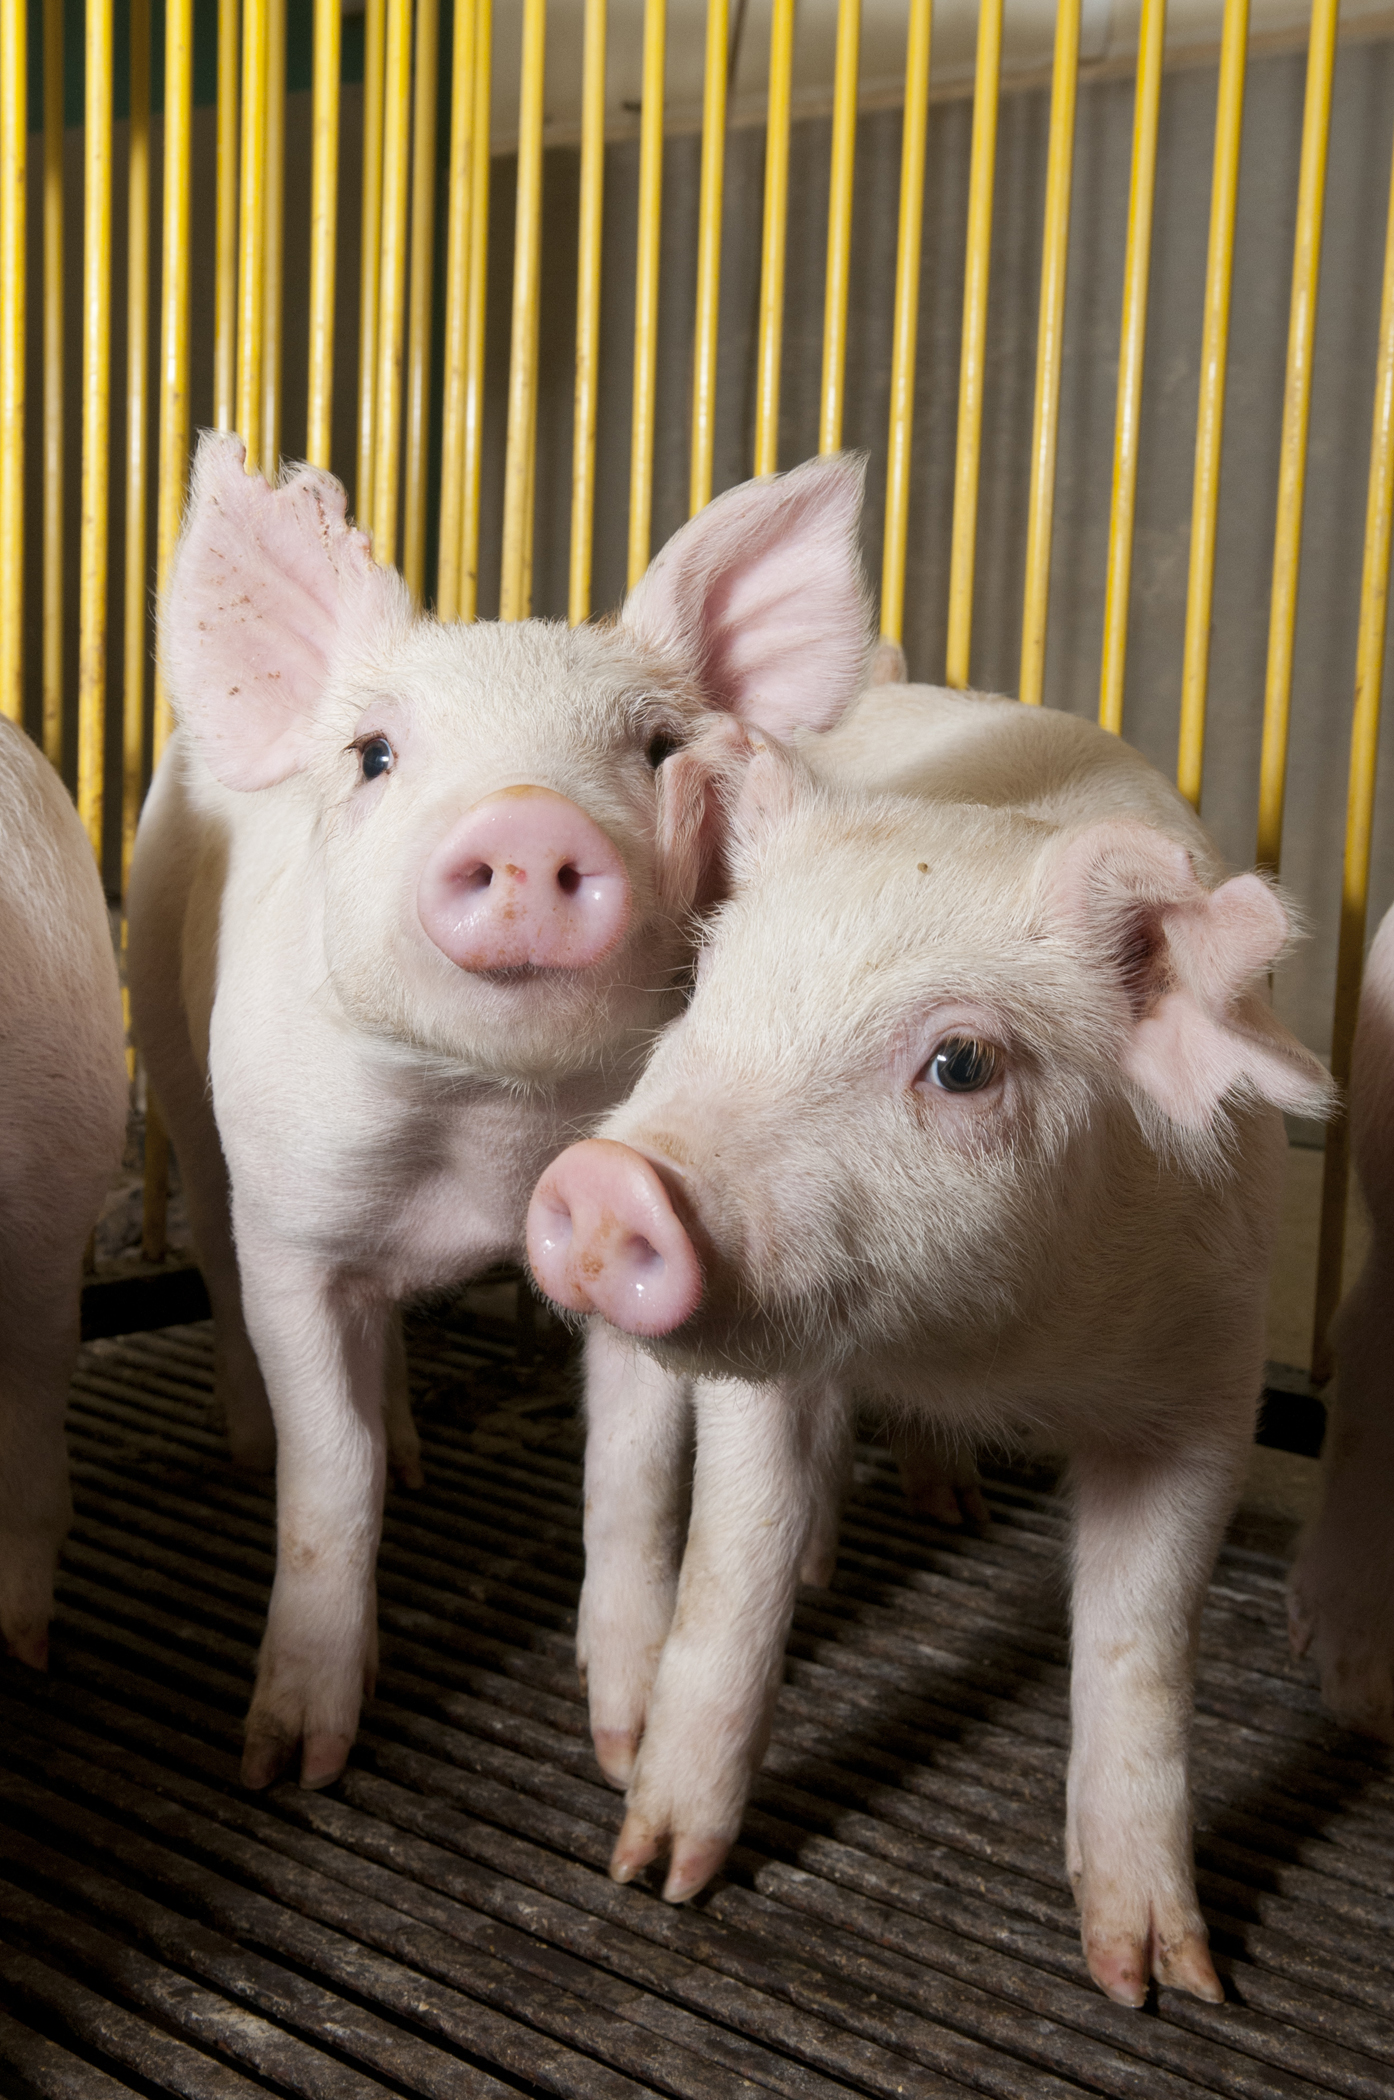 Research provides new insights into antibiotics and pig feeds